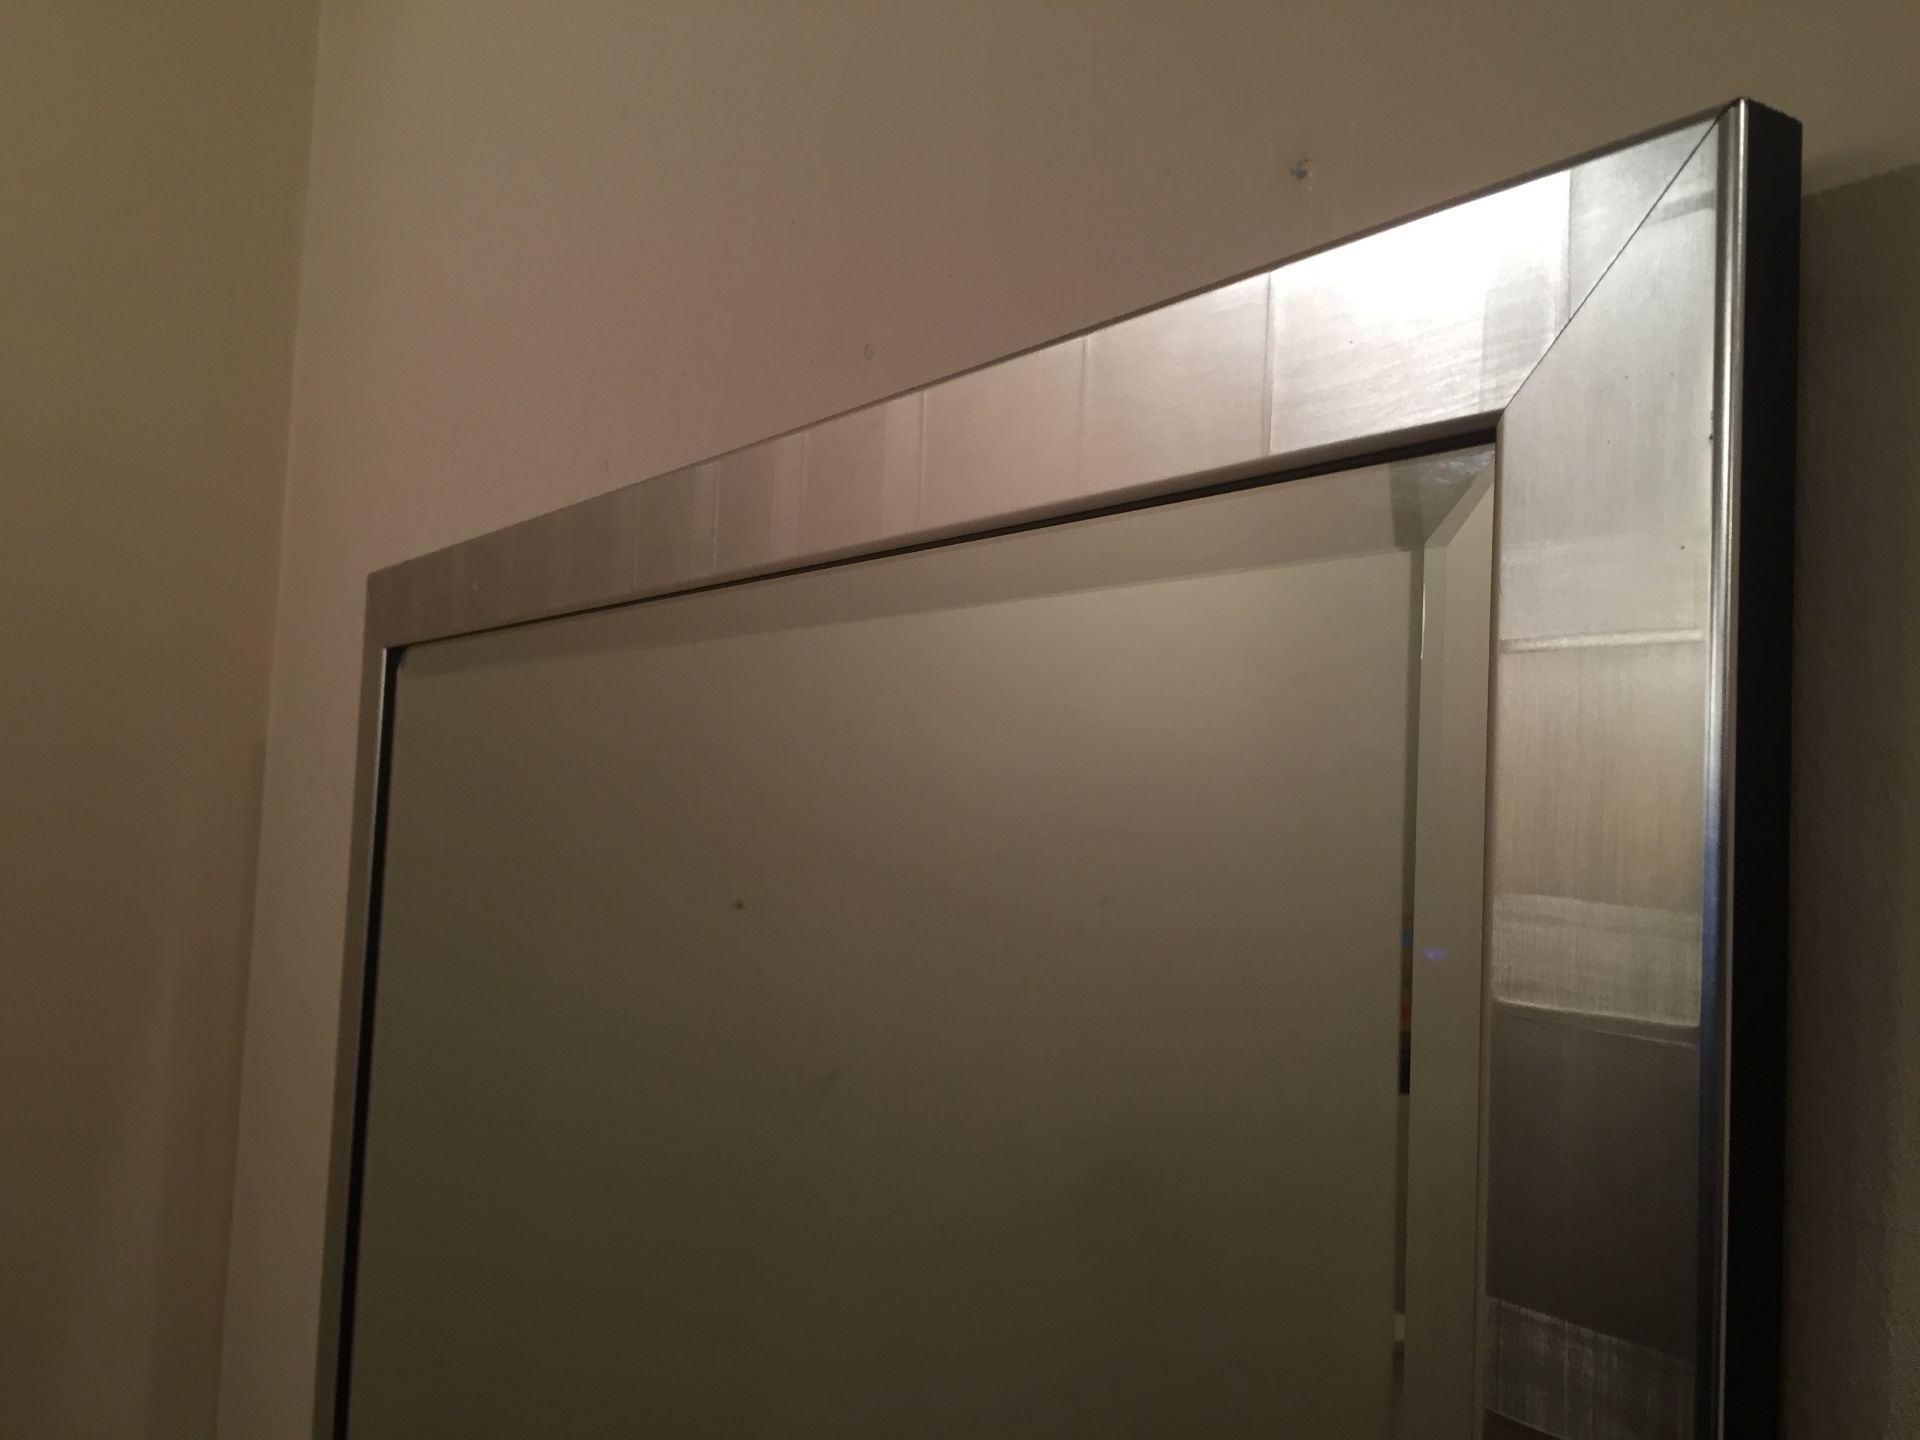 1 x Wall Mirror With Beveled Edge - Dimensions: 60 x 82.5cm - Ref: APB009 - Good Condition - City - Image 3 of 4